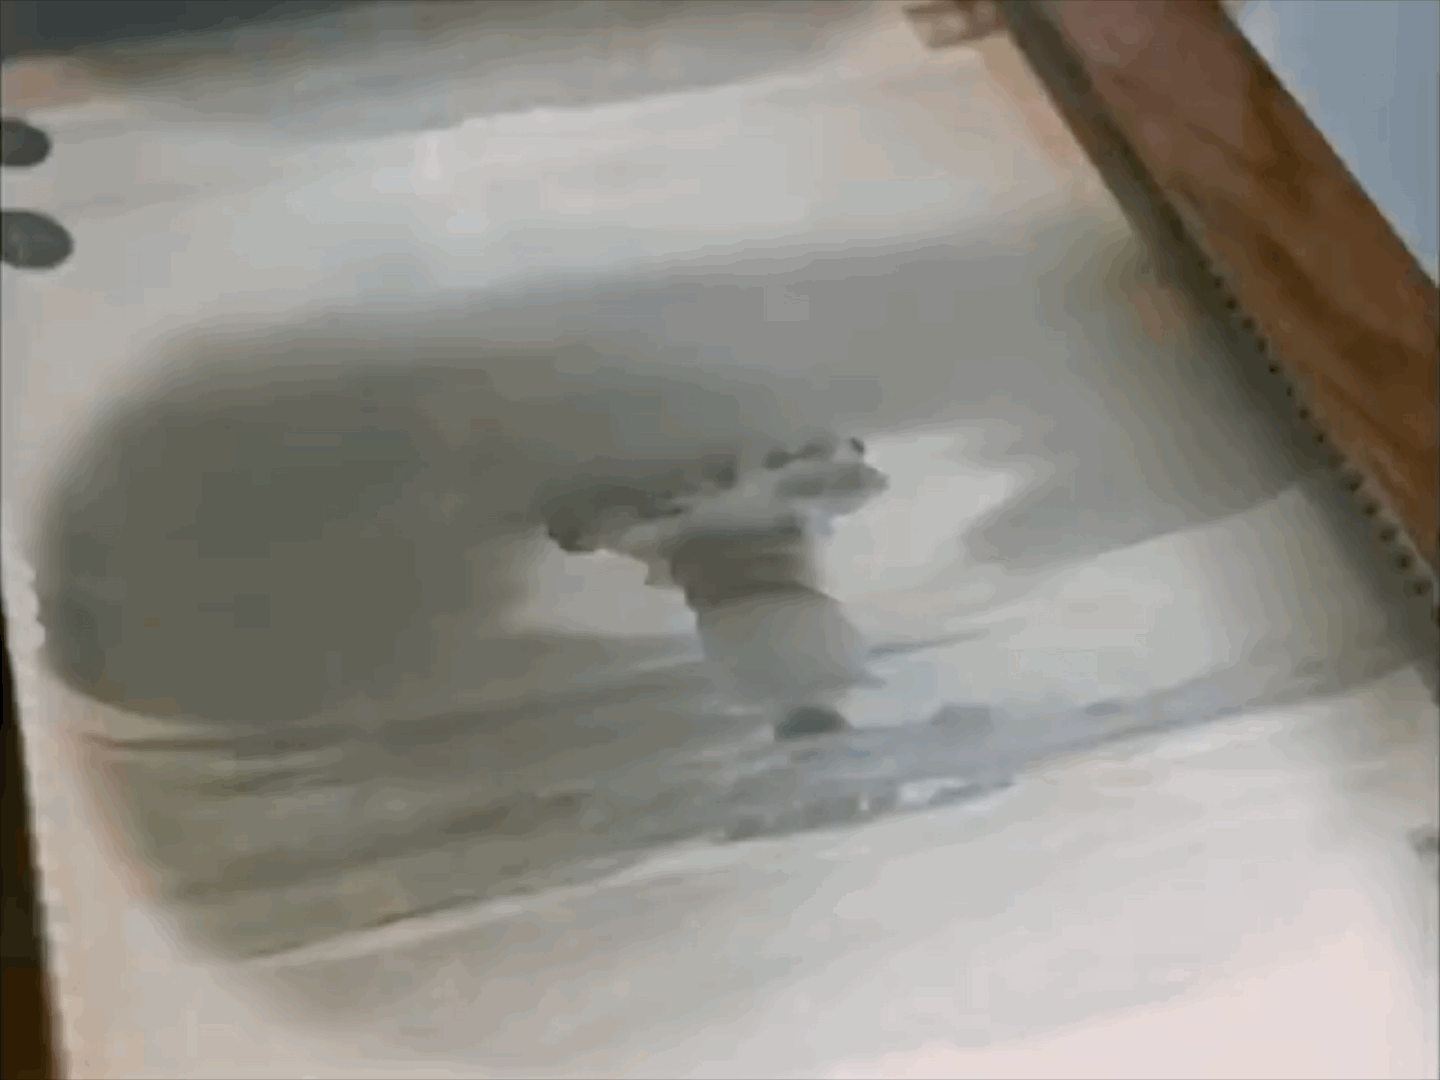 Footage from the Tsar Bomba documentary footage released in August 2020, showing photo frames of the detonation examined by Soviet military officers.